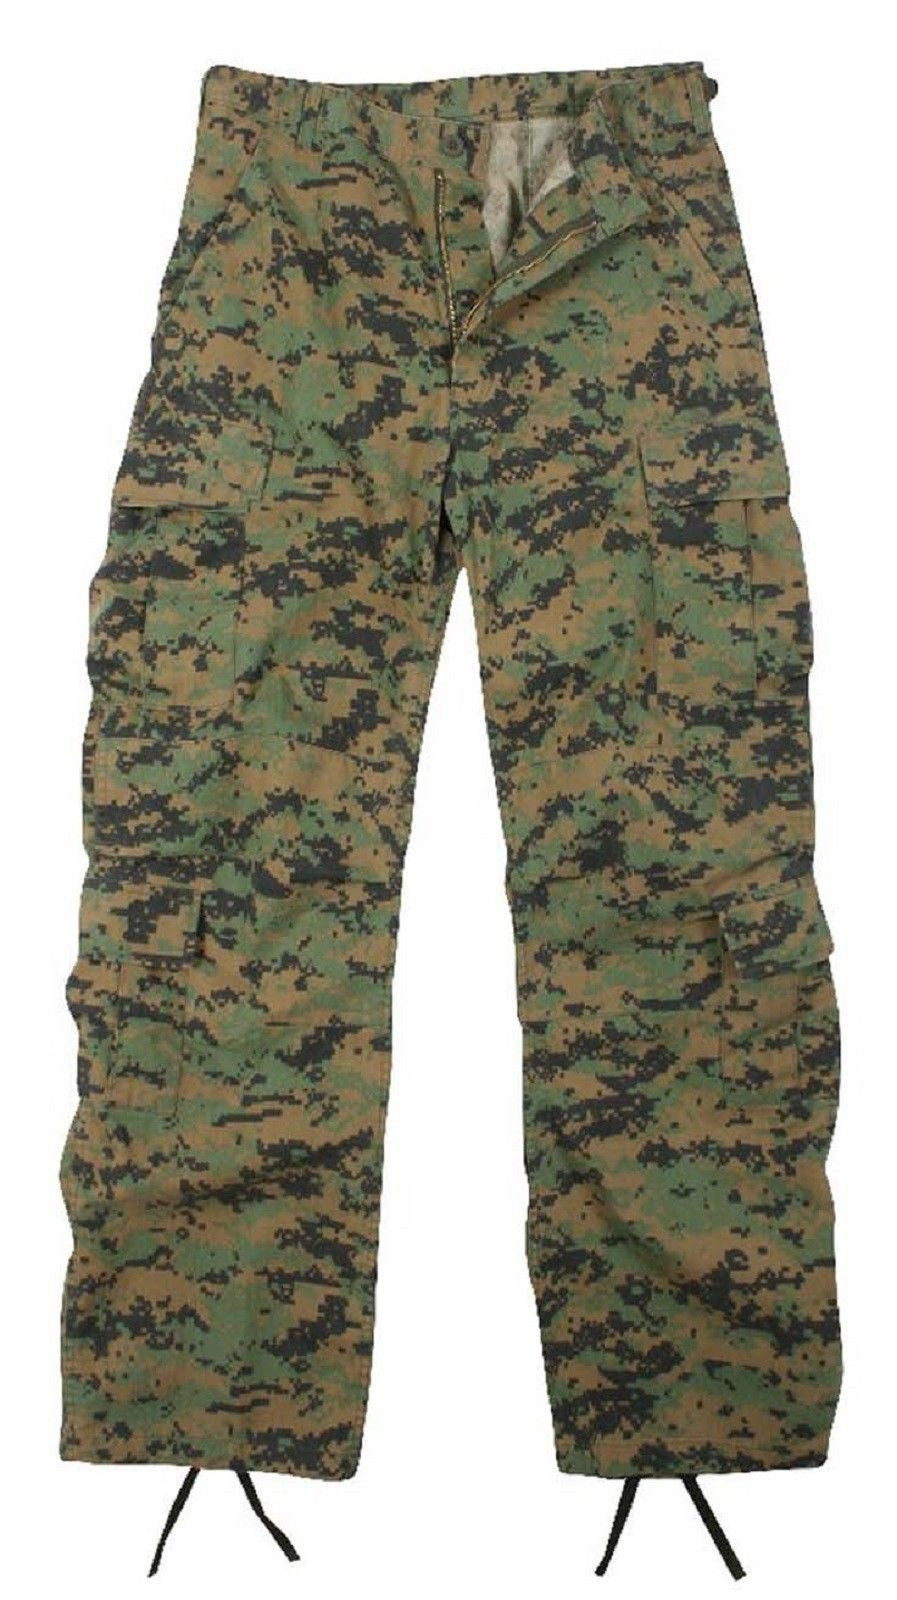 Buy Military Tactical Men's Combat Uniform Set Shirt and Pants Sets Cp Camo  Uniforms for Army Airsoft Paintball Hunting…, Jungle Digital, X-Large at  Amazon.in